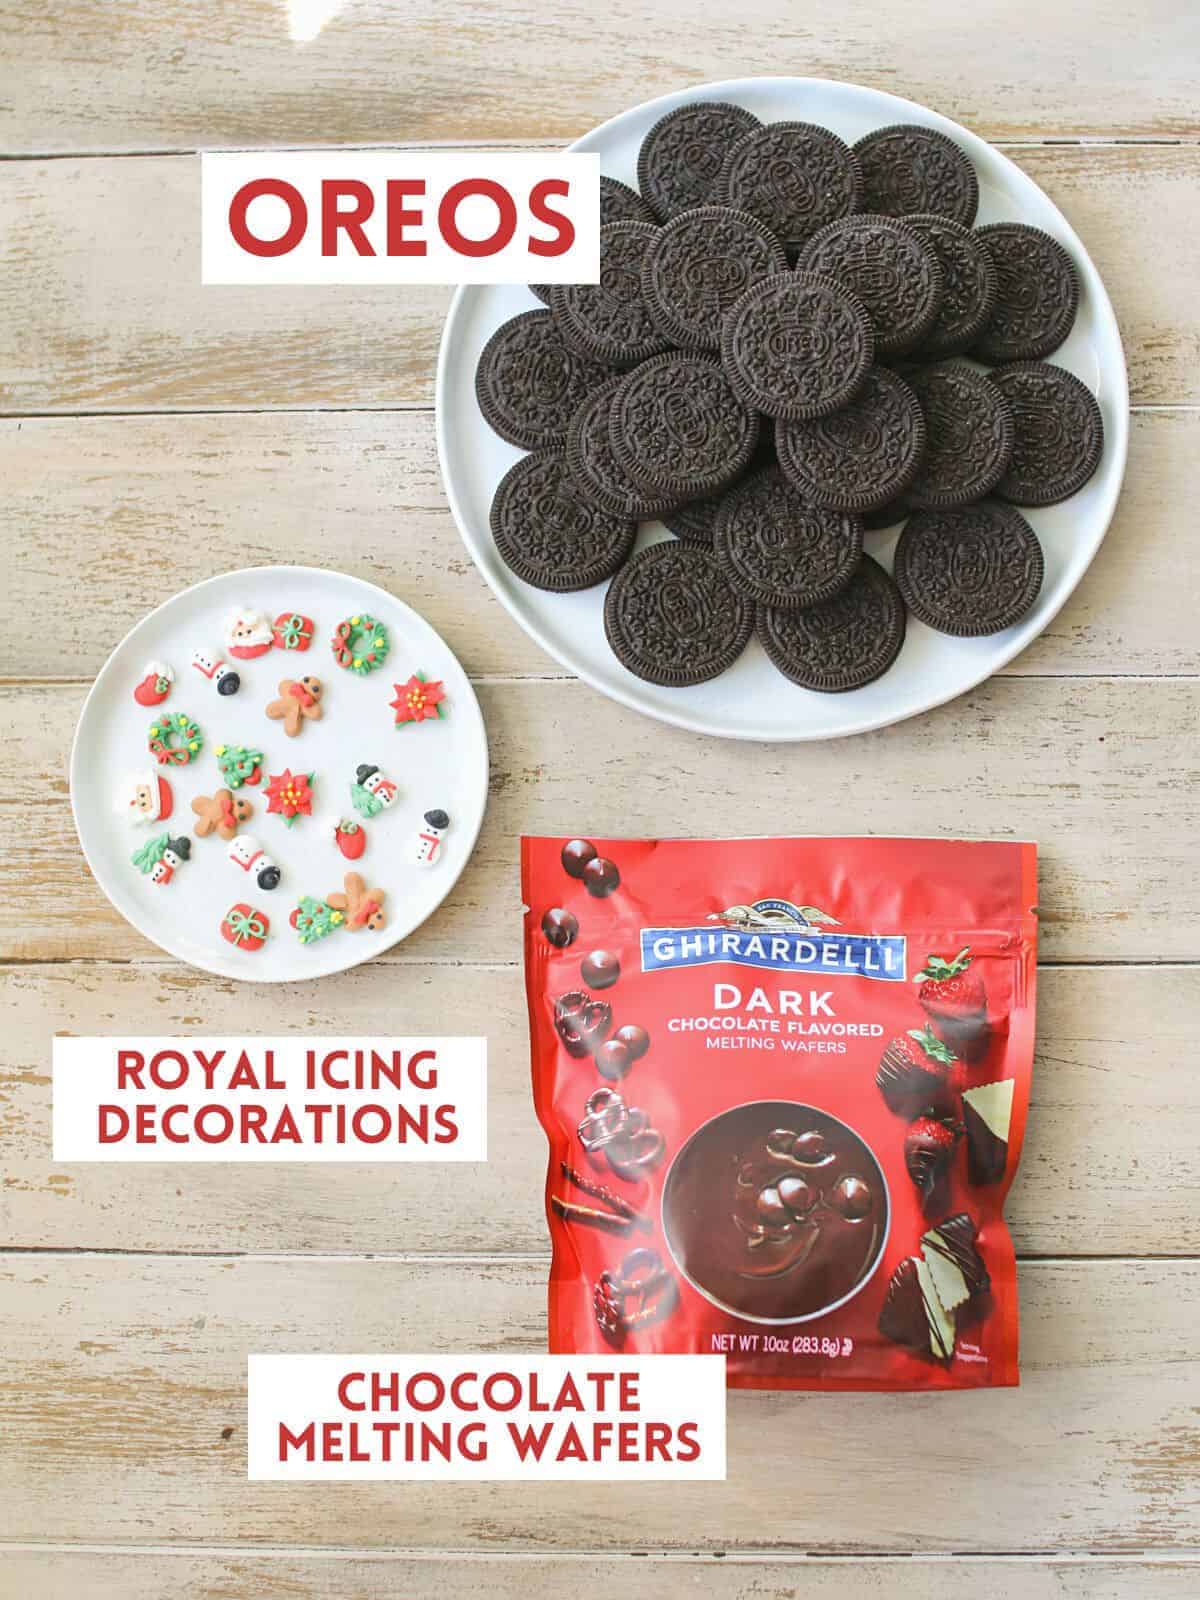 A white plate with oreos stacked, a smaller white plate with a variety of Christmas shaped royal icing pieces and a red bag of chocolate melting wafers. Each item is labeled with a white rectangle box with text in all caps in dark red on a light wood plank background.